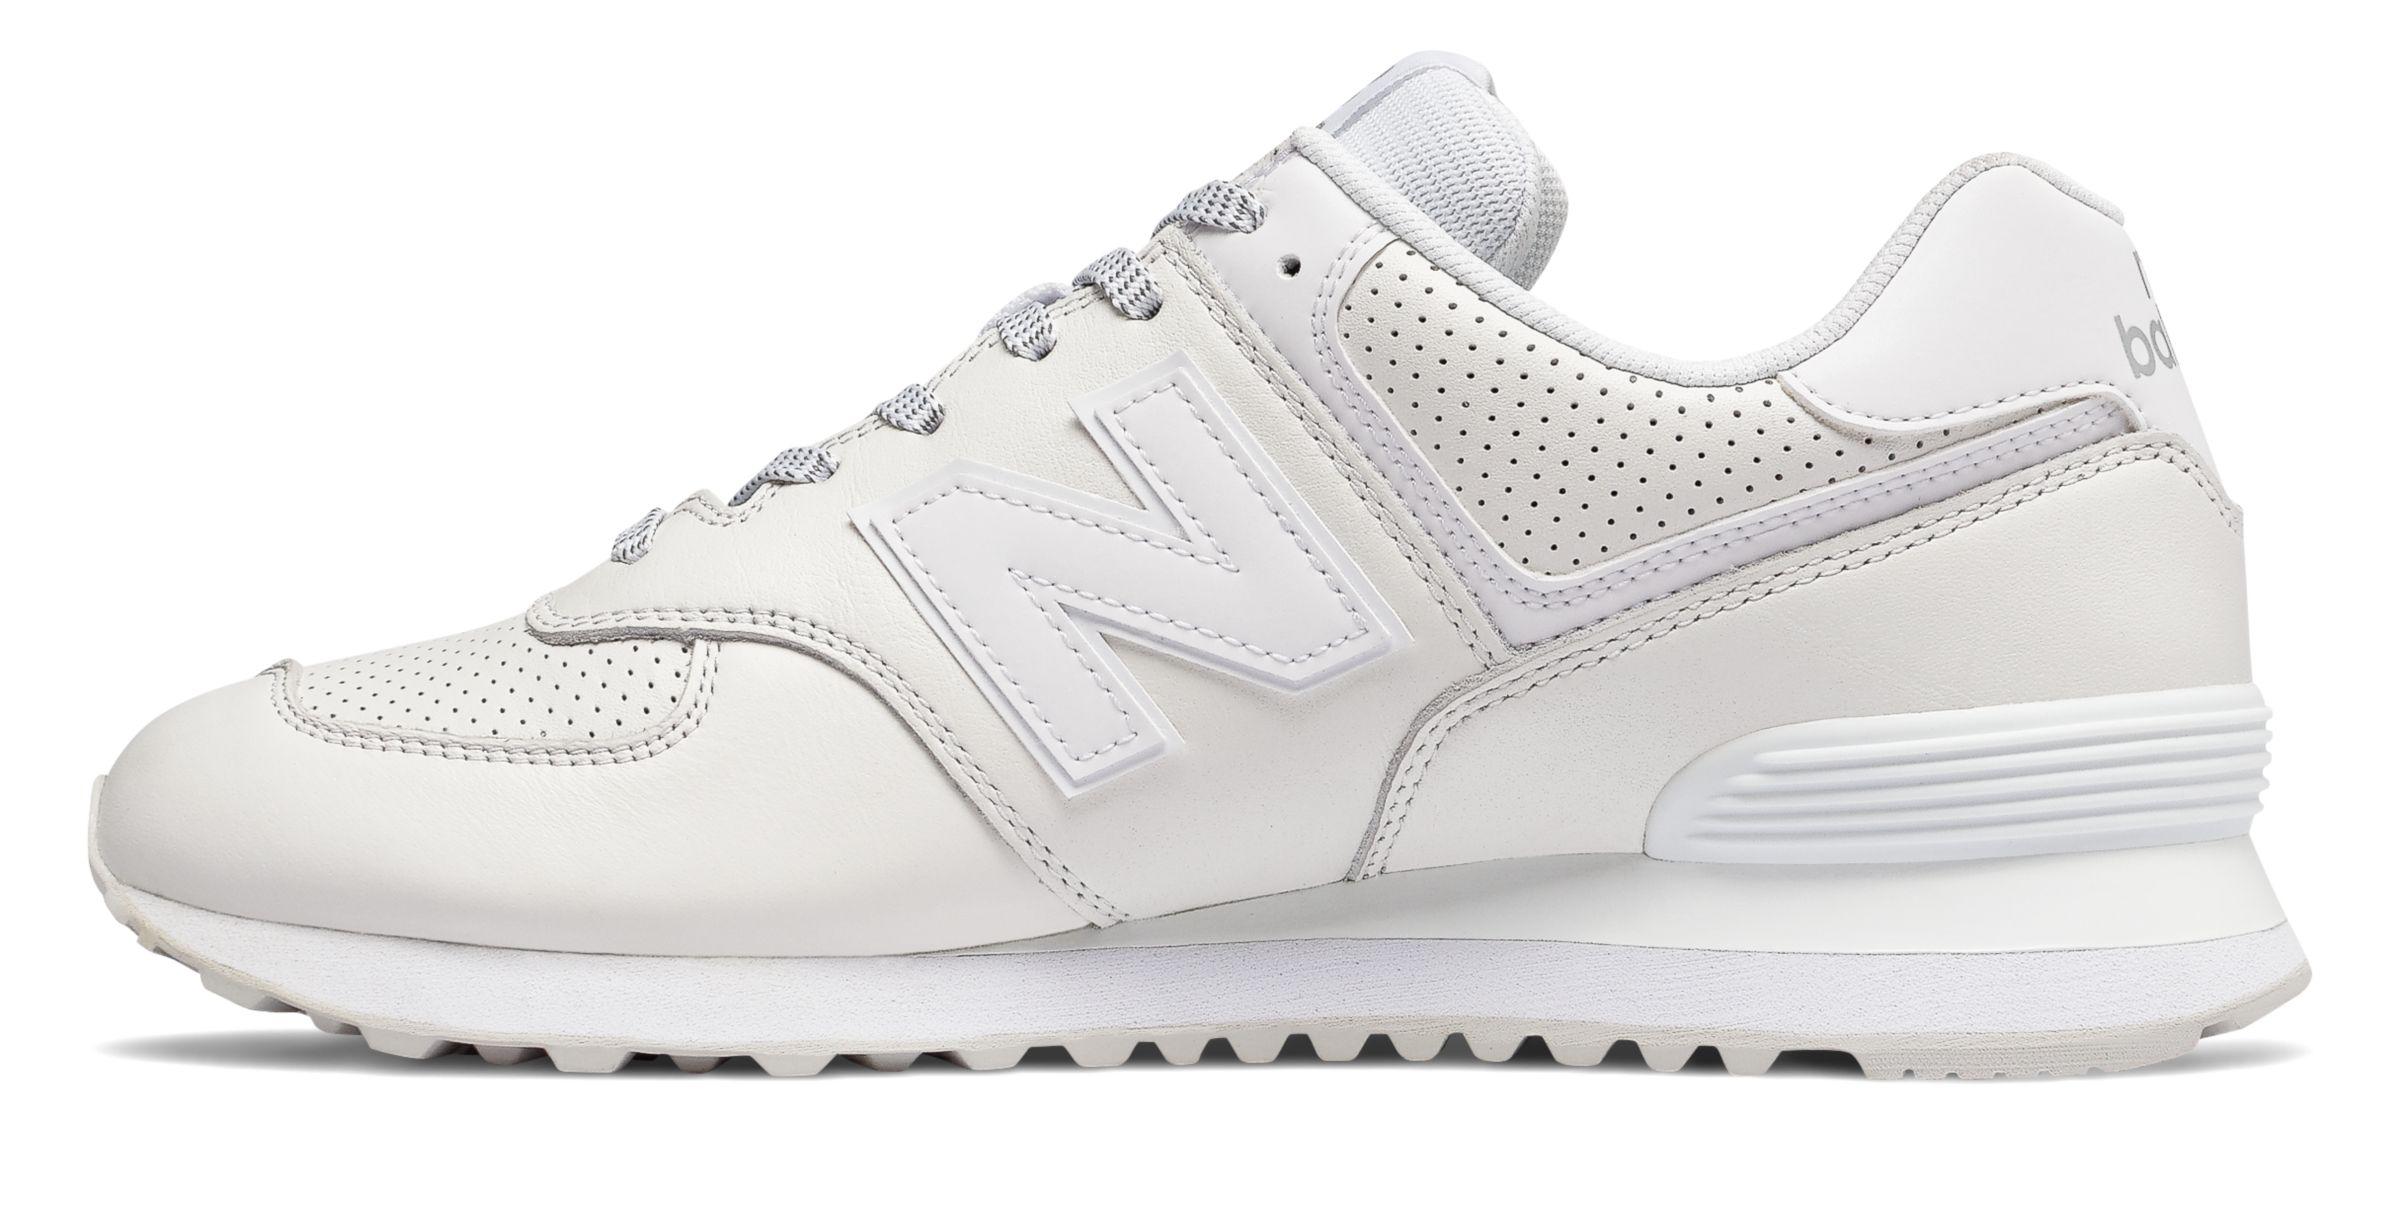 New Balance 574 Luxe Leather in White for Men - Lyst